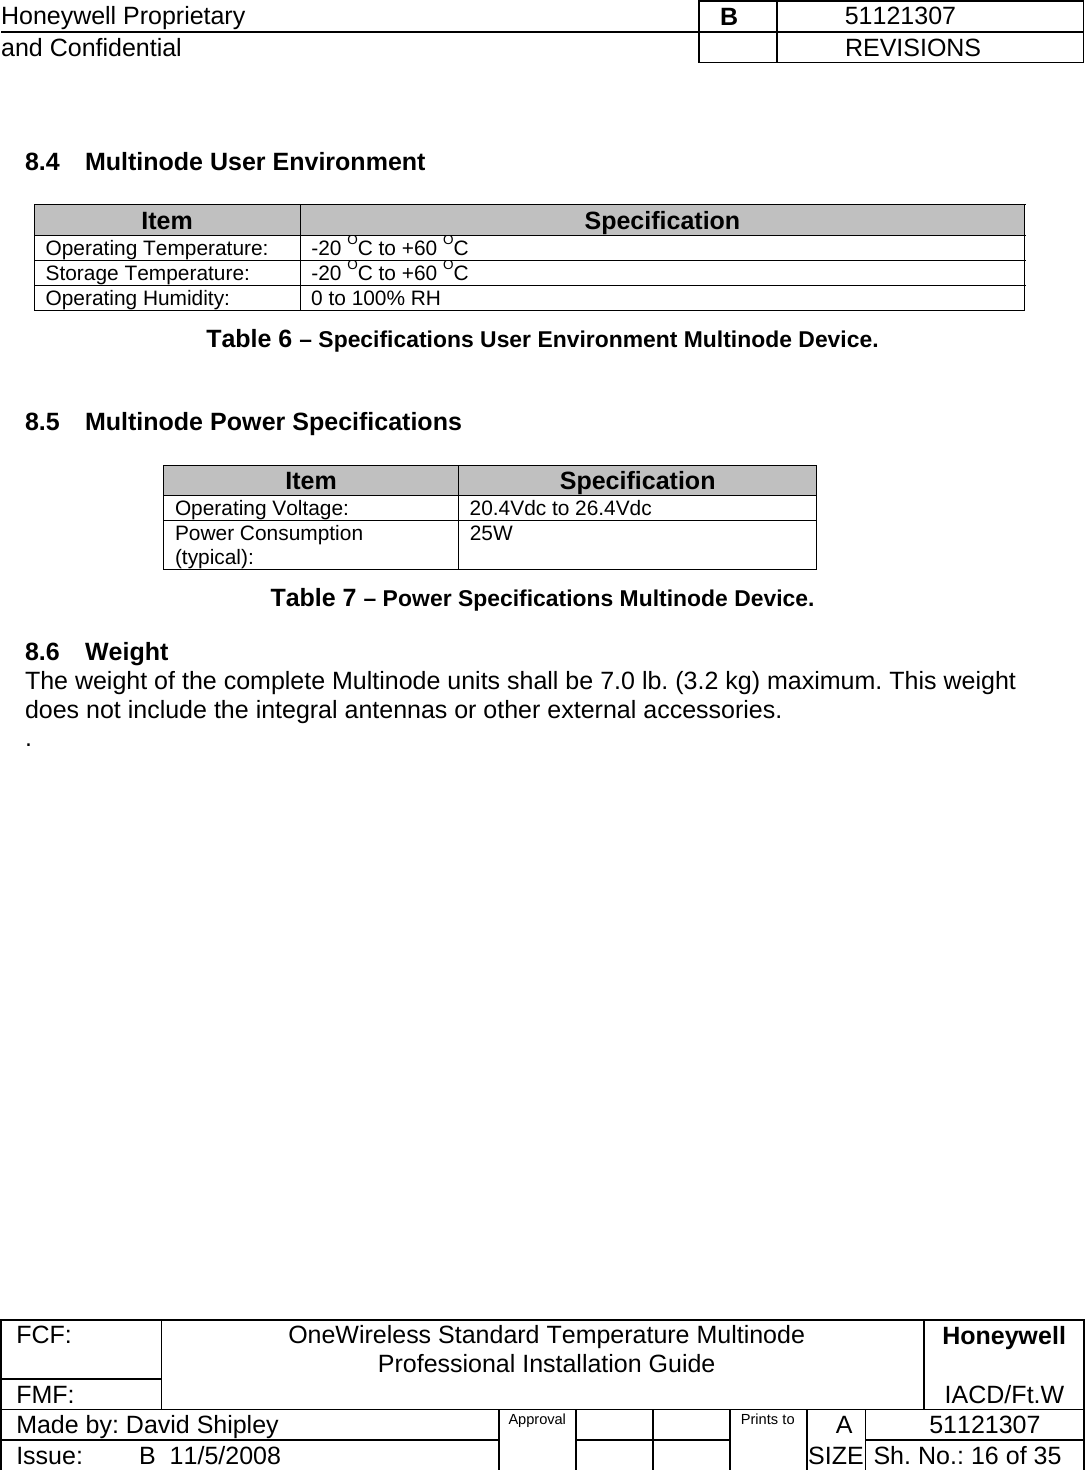 Honeywell Proprietary    B         51121307 and Confidential             REVISIONS  FCF: OneWireless Standard Temperature Multinode  Professional Installation Guide  Honeywell FMF:               IACD/Ft.W Made by: David Shipley  Approval   Prints to     A           51121307 Issue:        B  11/5/2008          SIZE  Sh. No.: 16 of 35   8.4  Multinode User Environment  Item SpecificationOperating Temperature:  -20 OC to +60 OC  Storage Temperature:  -20 OC to +60 OC  Operating Humidity:  0 to 100% RH Table 6 – Specifications User Environment Multinode Device.  8.5  Multinode Power Specifications  Item SpecificationOperating Voltage:  20.4Vdc to 26.4Vdc Power Consumption (typical):  25W Table 7 – Power Specifications Multinode Device. 8.6 Weight  The weight of the complete Multinode units shall be 7.0 lb. (3.2 kg) maximum. This weight does not include the integral antennas or other external accessories. .  